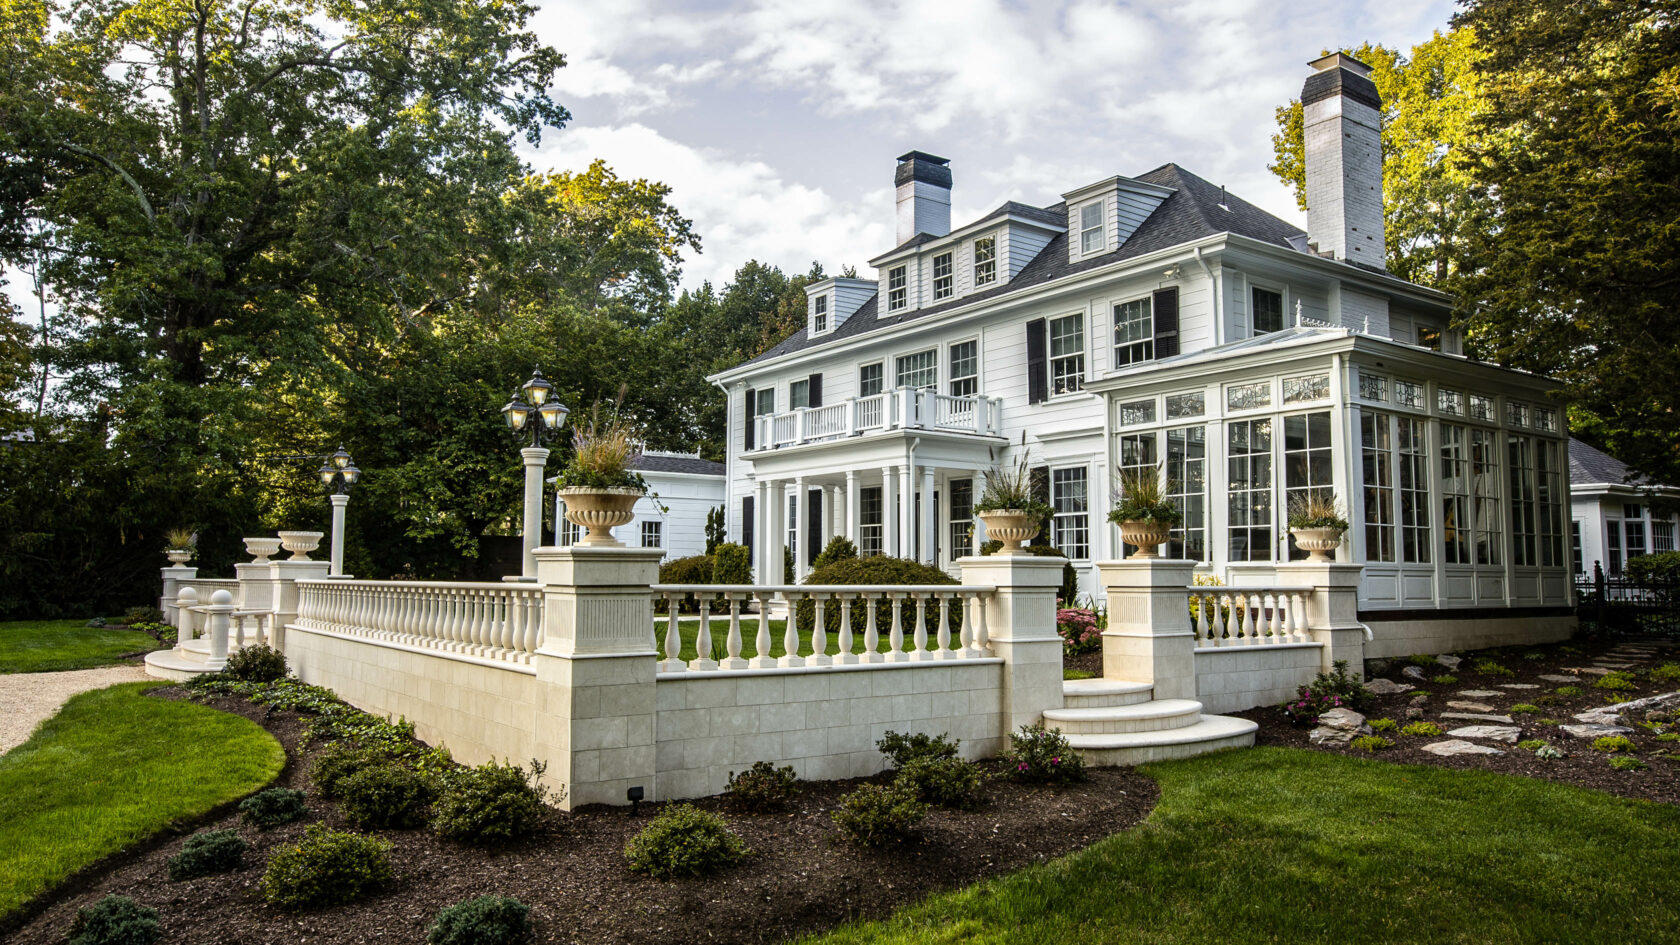 Stone balusters surround the front courtyard of a mansion in Natick, MA. Masonry designed/built by Dex by Terra.